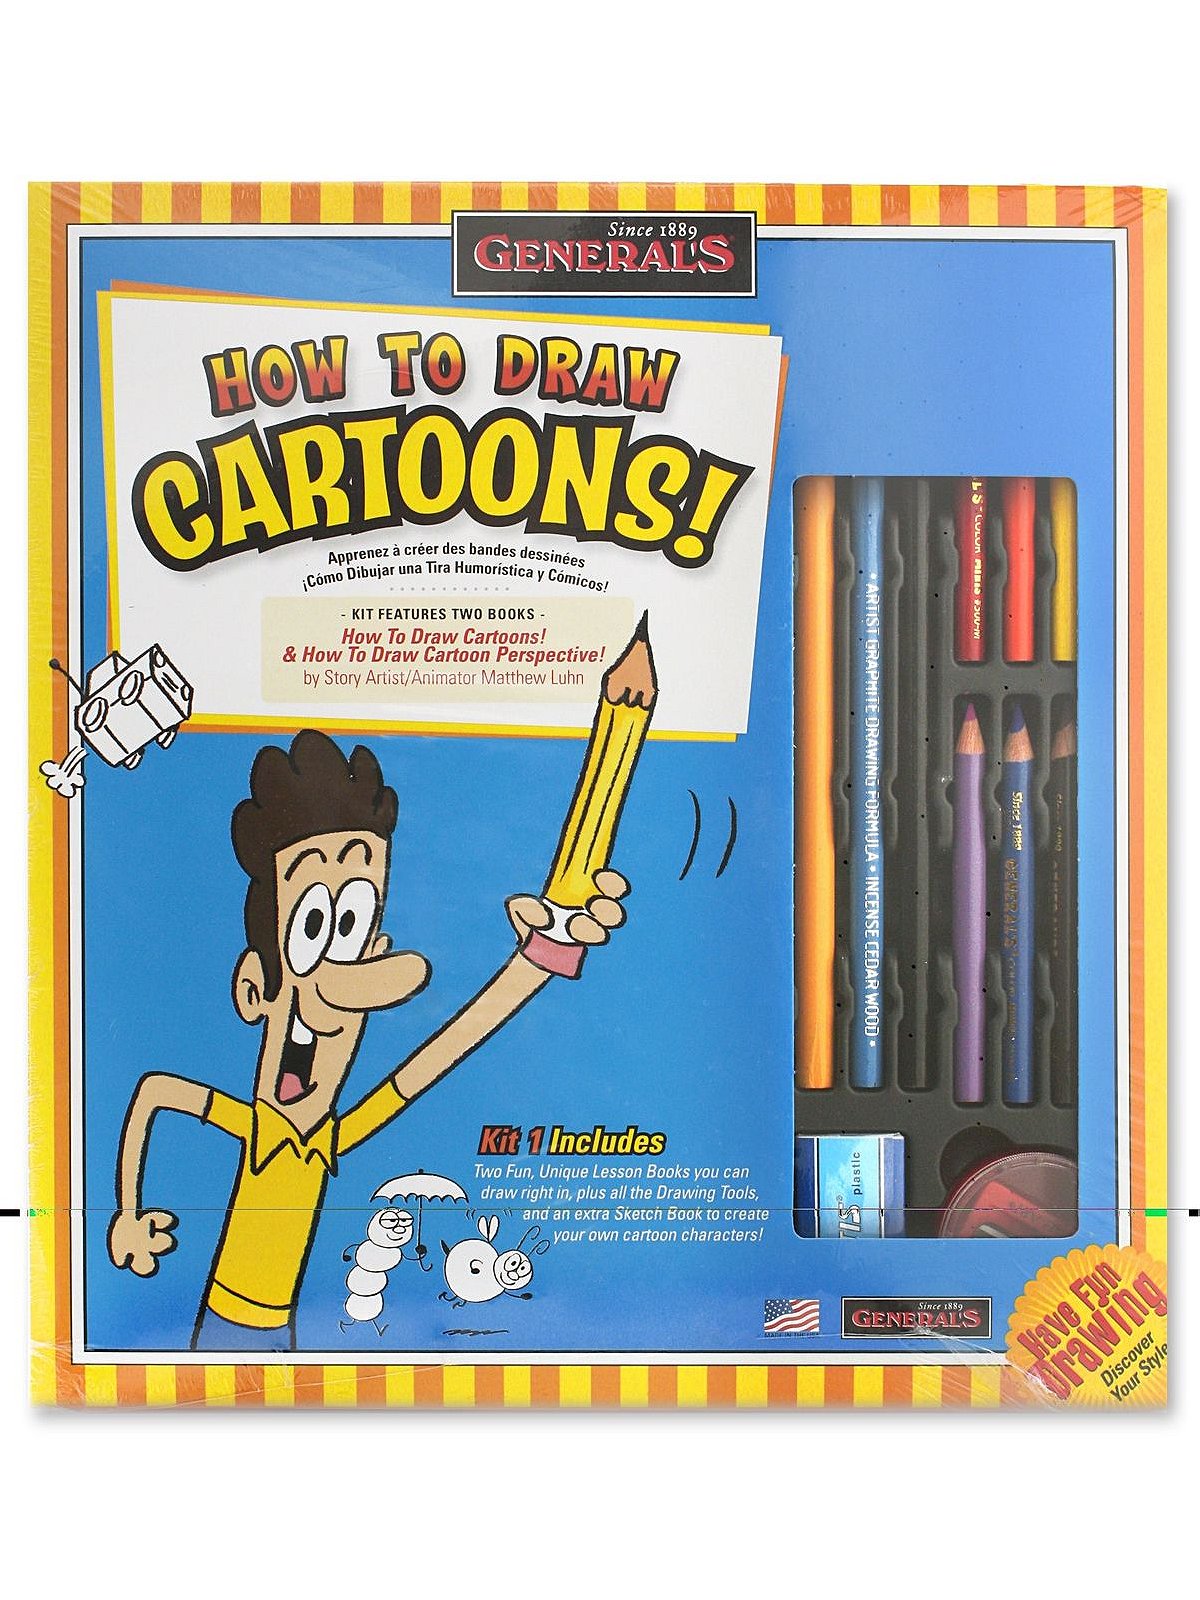 You Can Draw [Book]